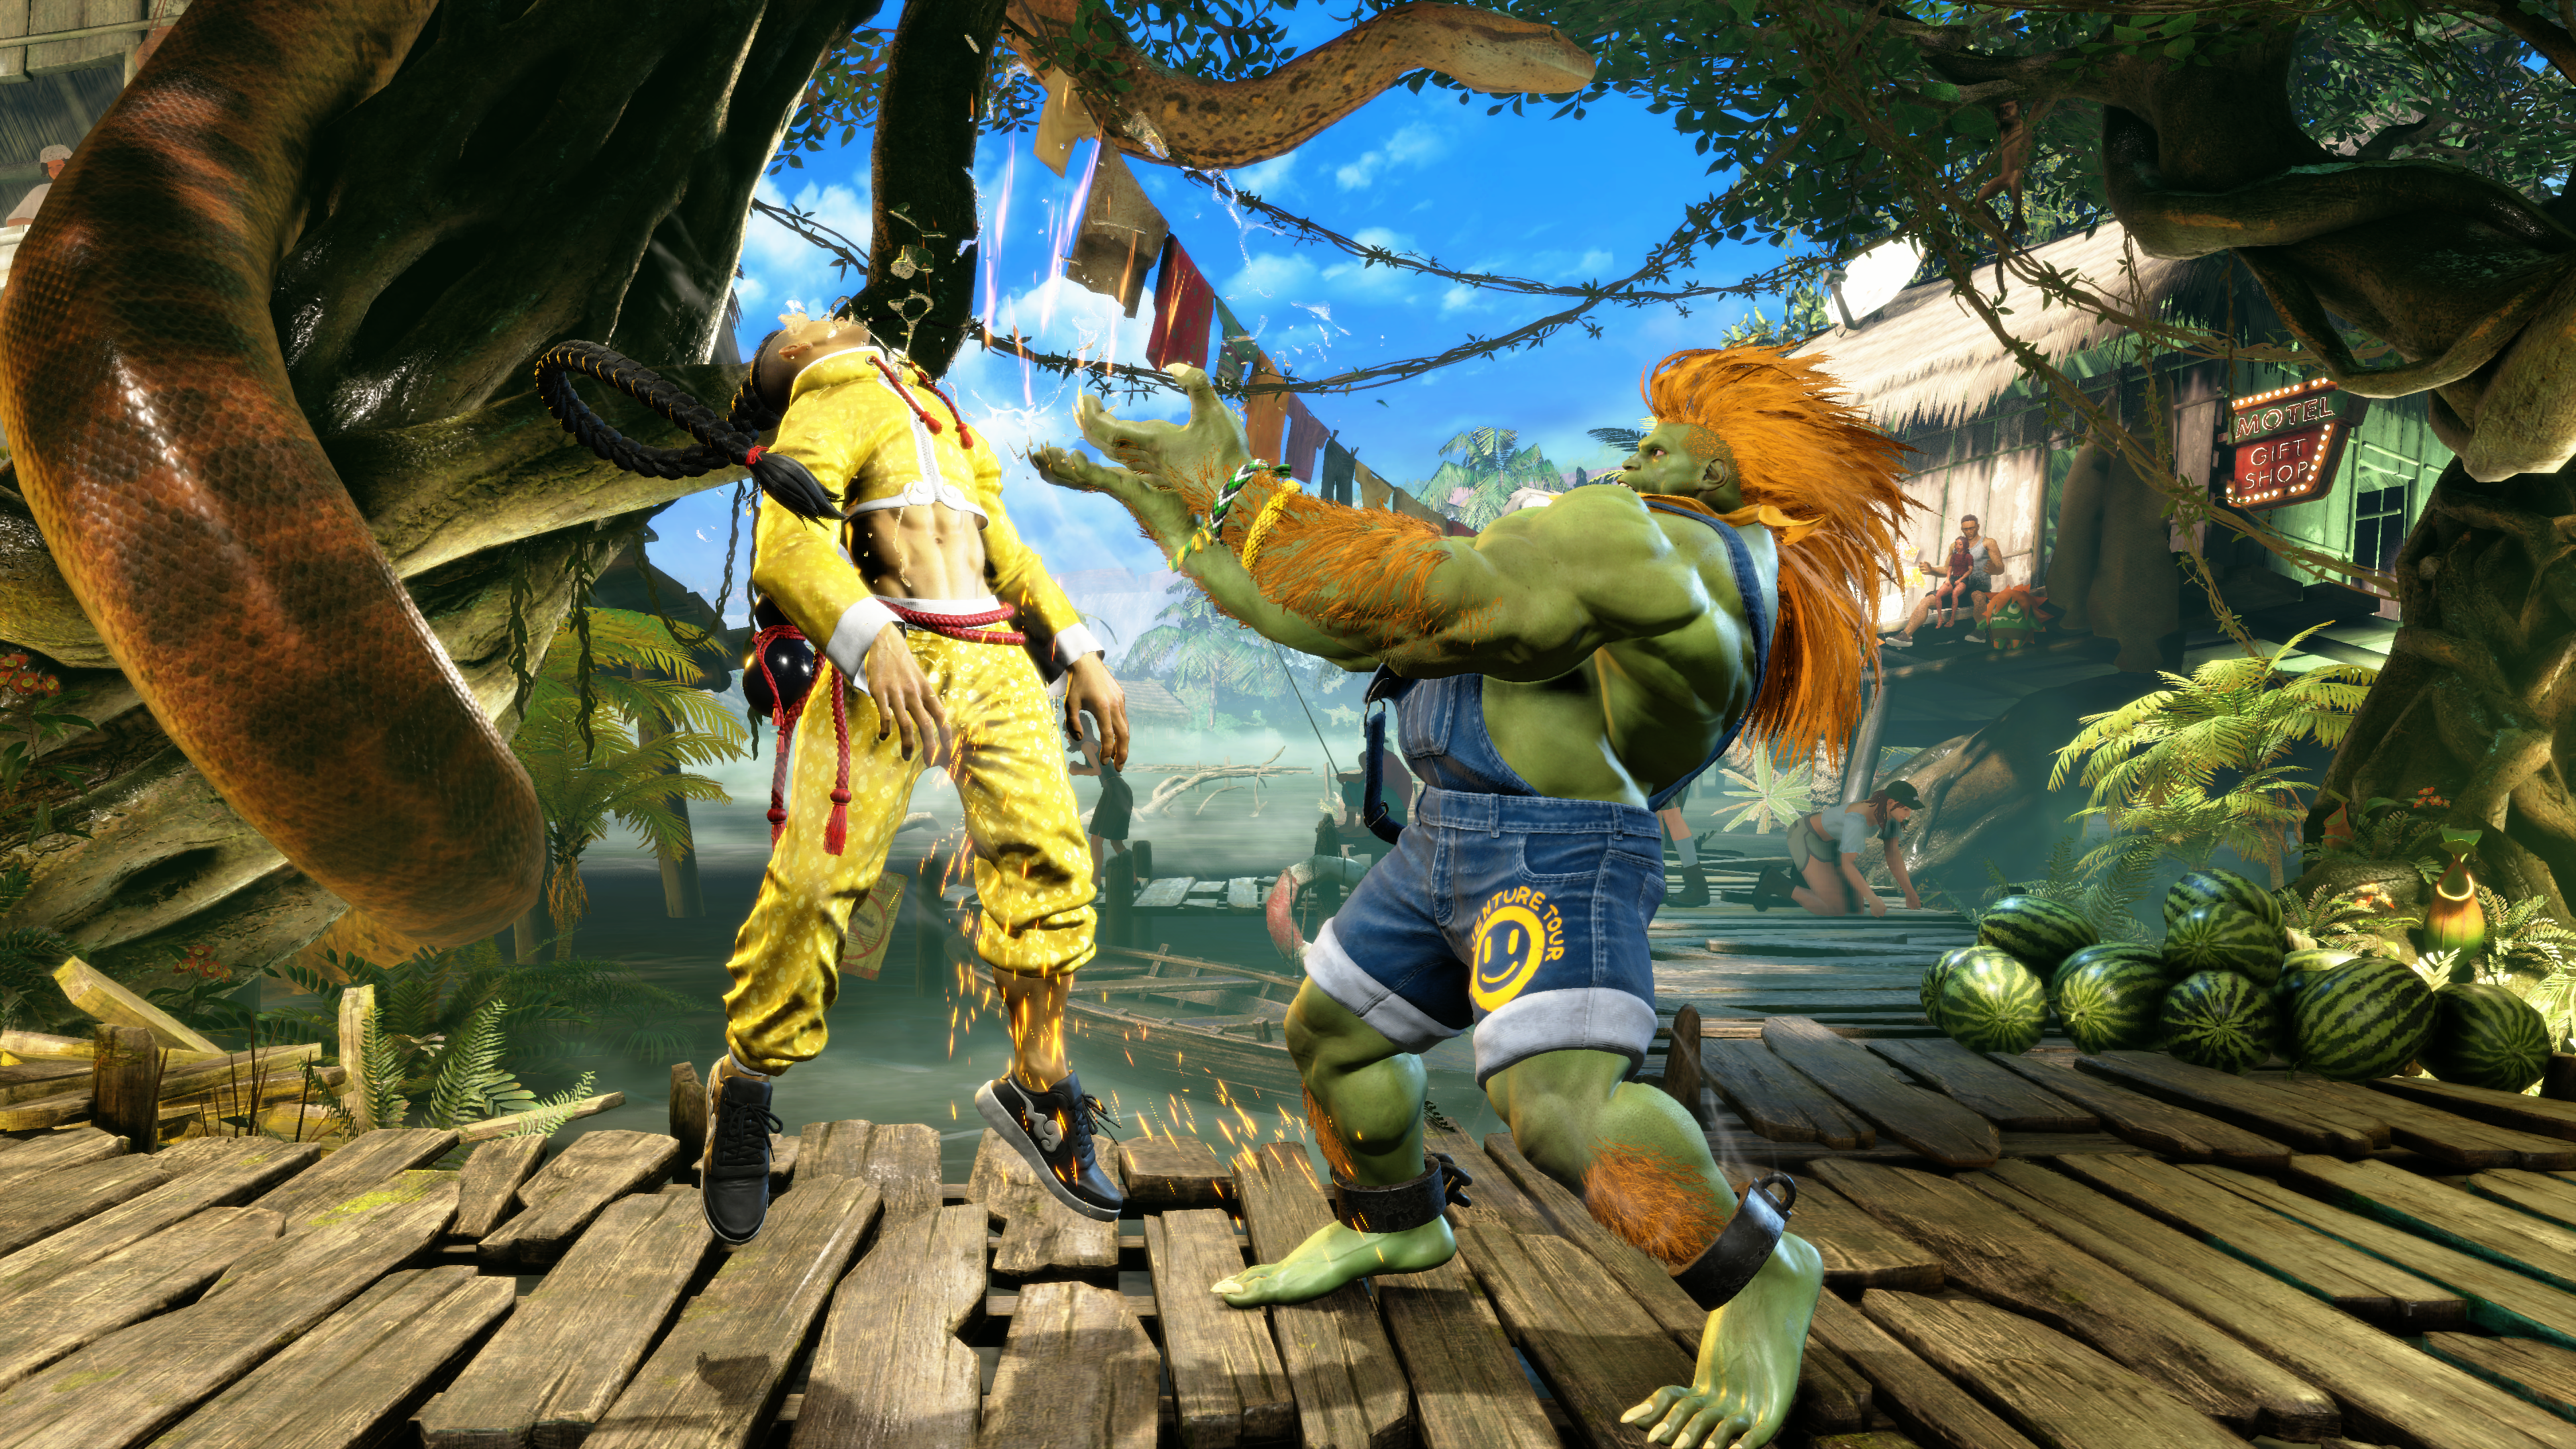 Blanka has a new, OP move in Street Fighter 6 that you need to